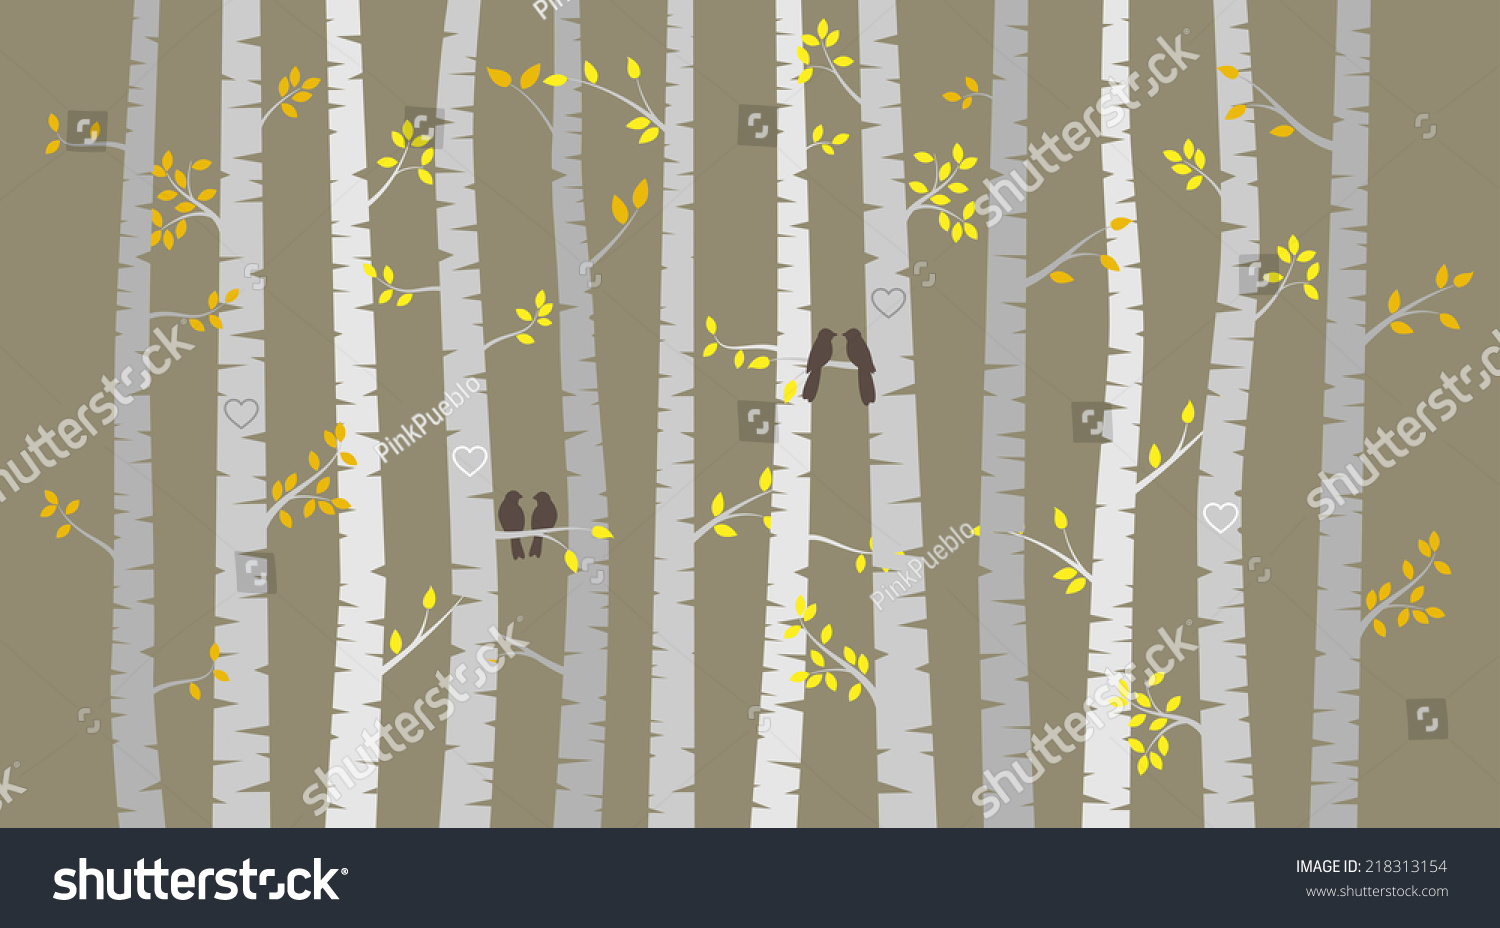 SVG of Vector Birch or Aspen Trees with Autumn Leaves and Love Birds svg